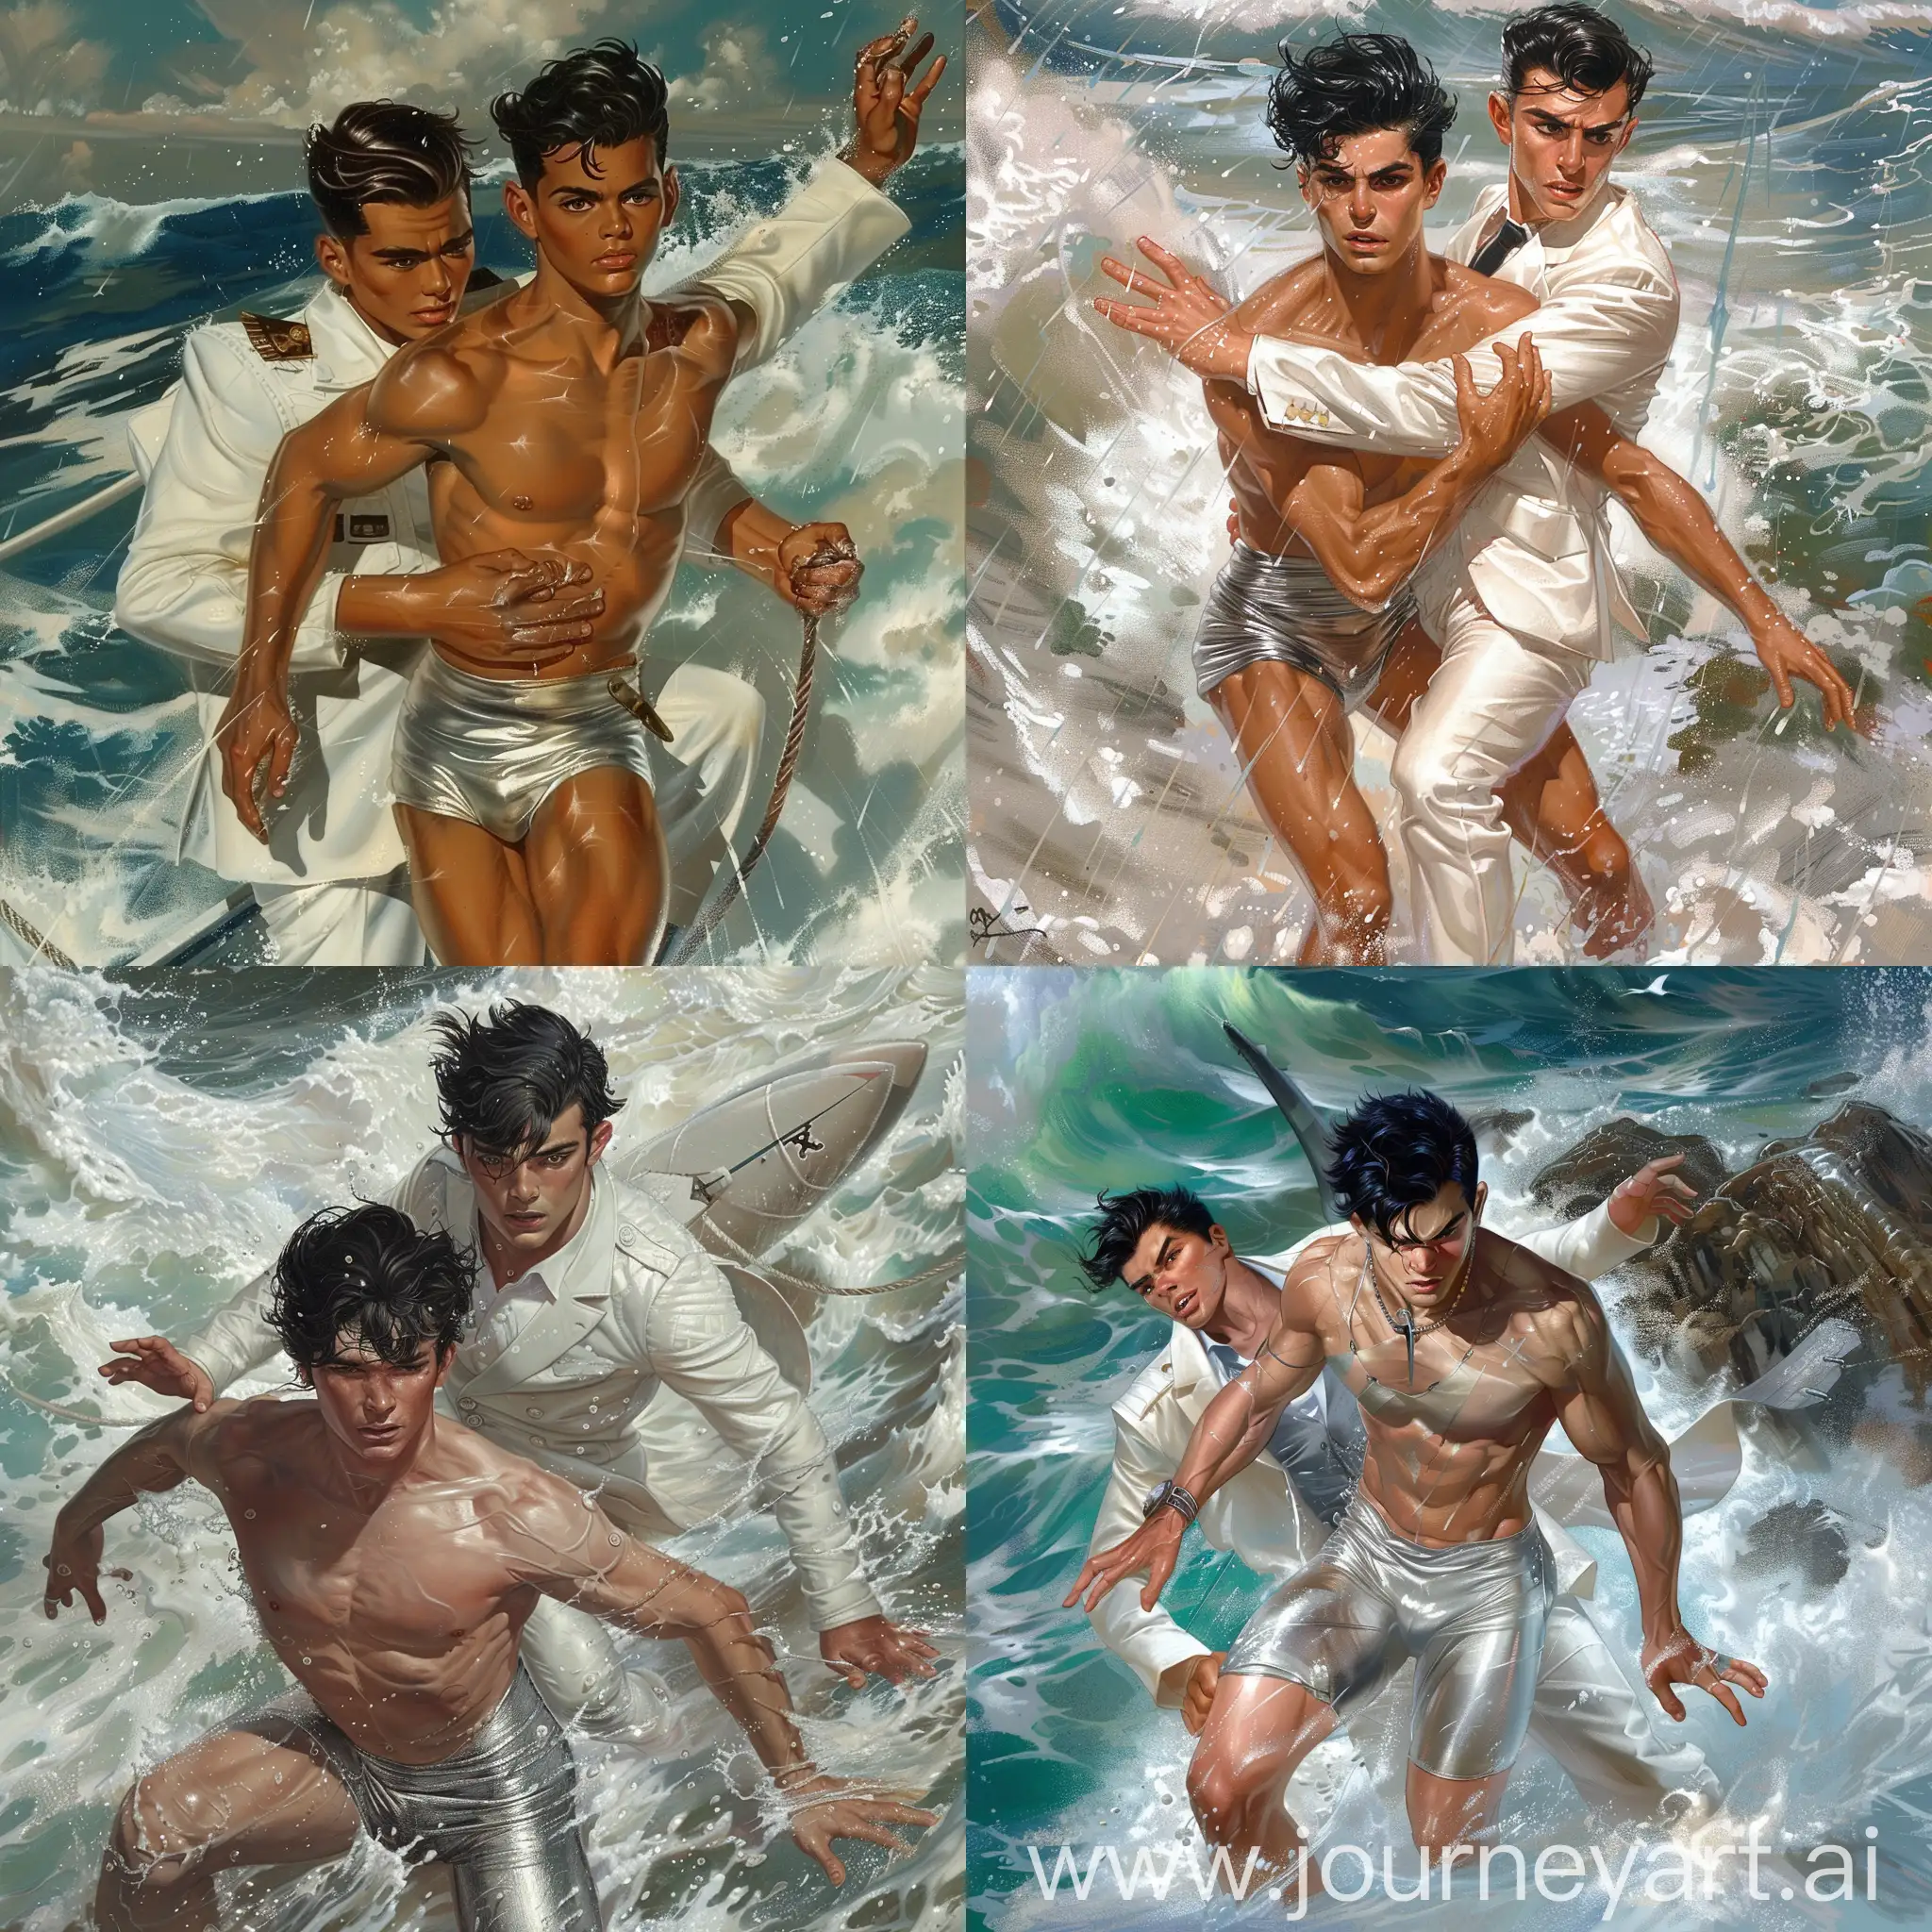 strong young male, black hair, tiny silver swimsuit, carrying a stroung young male sailor in white suit, in a wild sea